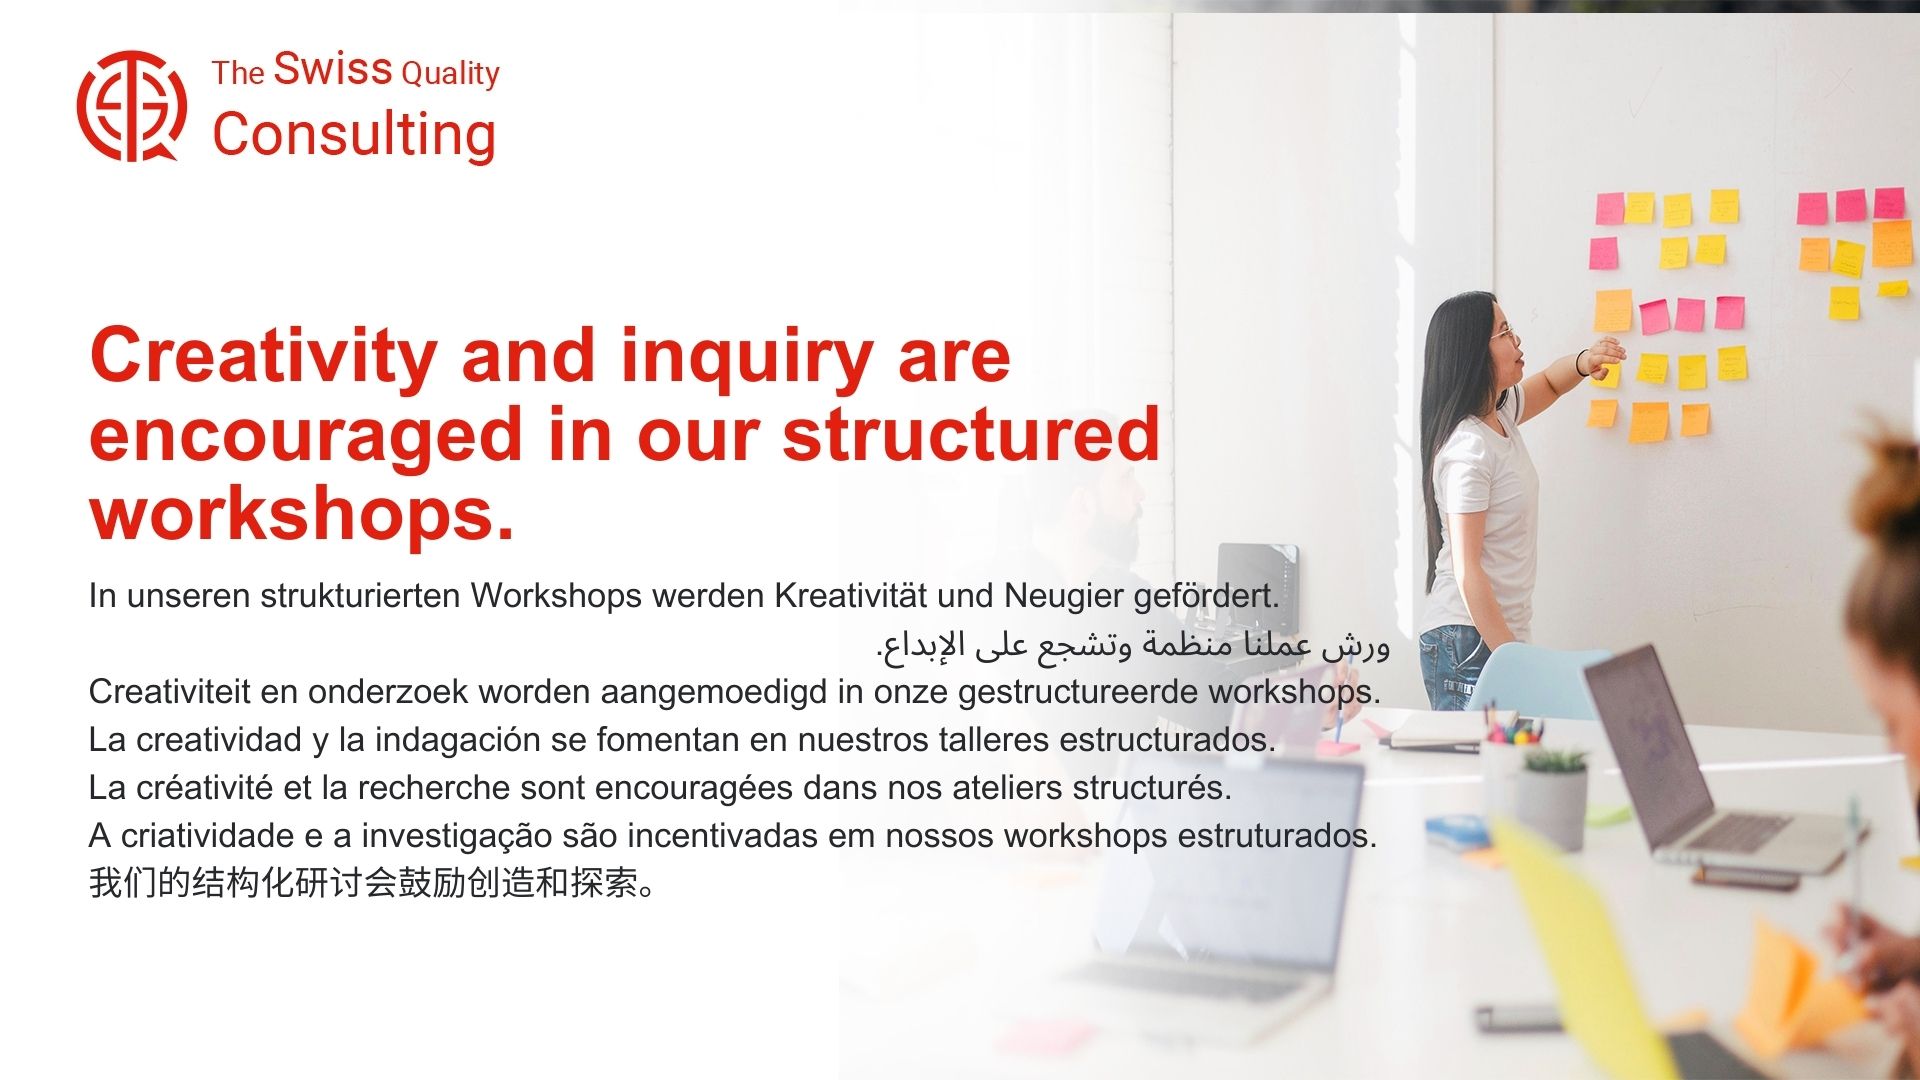 Structured Workshops for Creativity and Inquiry: Fostering Innovation in Business